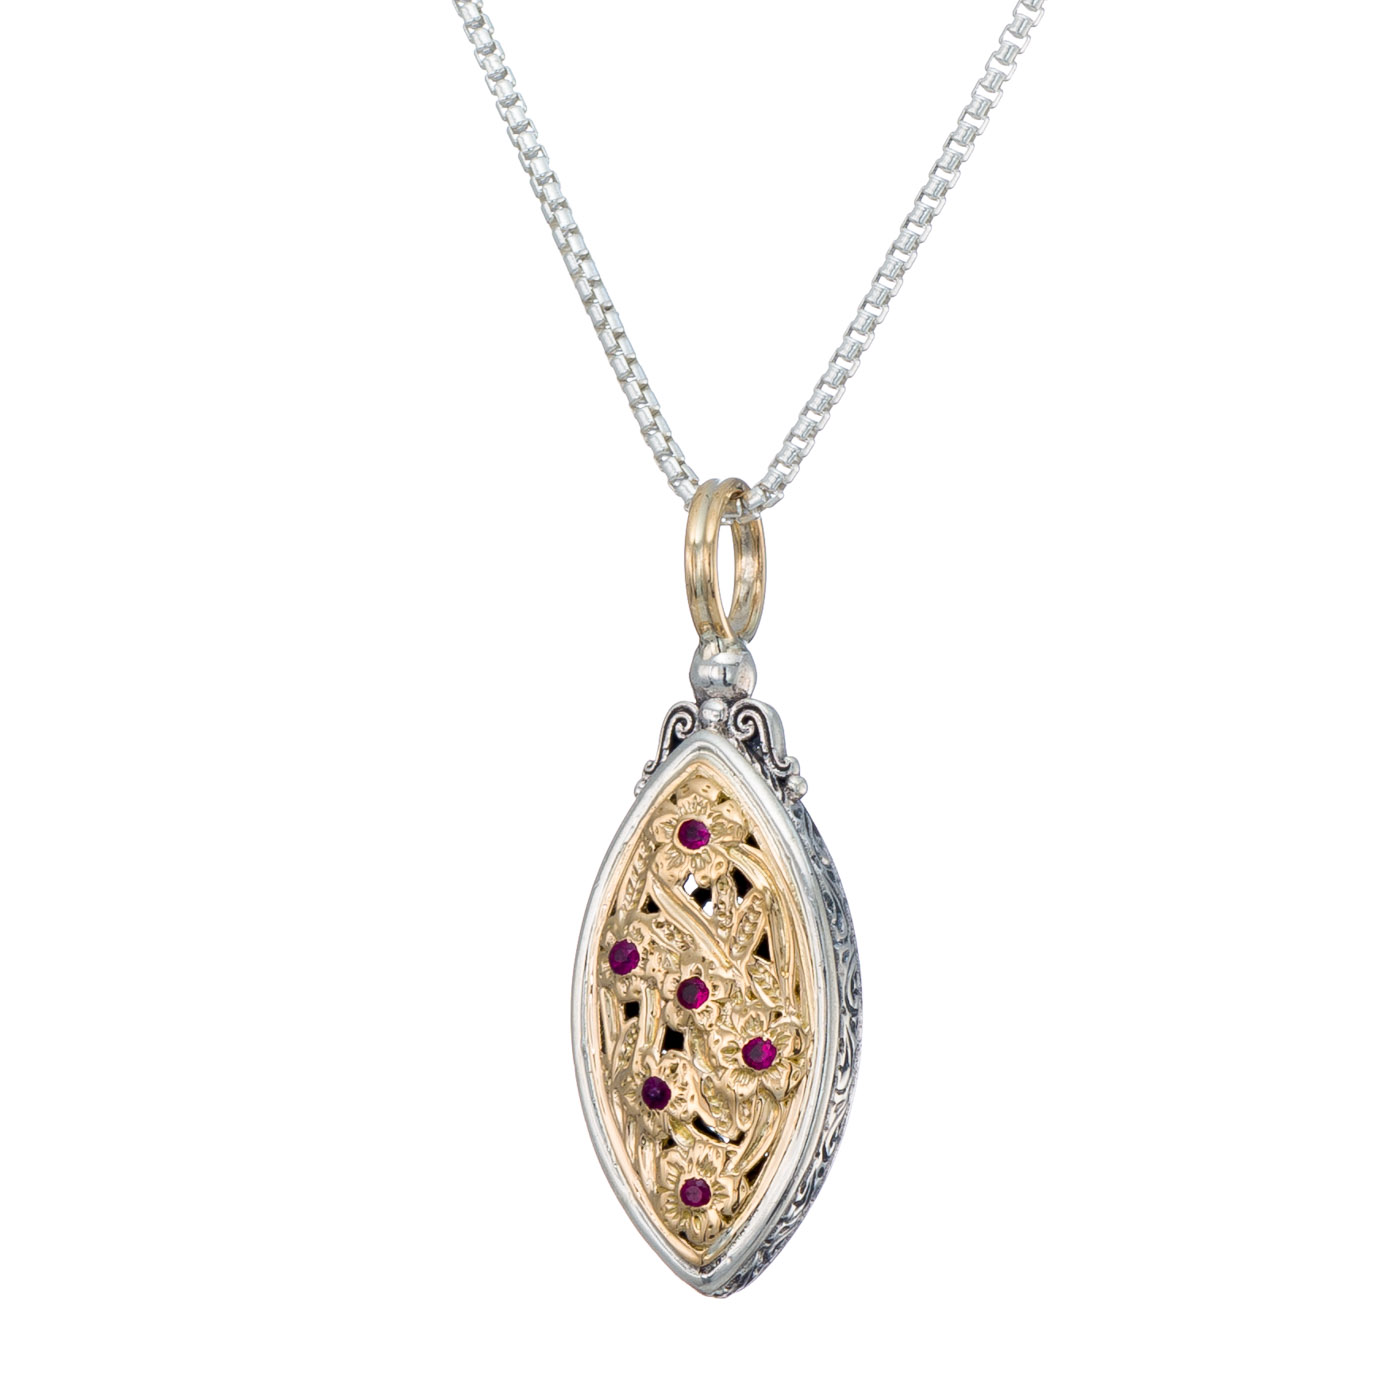 Harmony Pendant in 18K Gold and Sterling silver with rubies